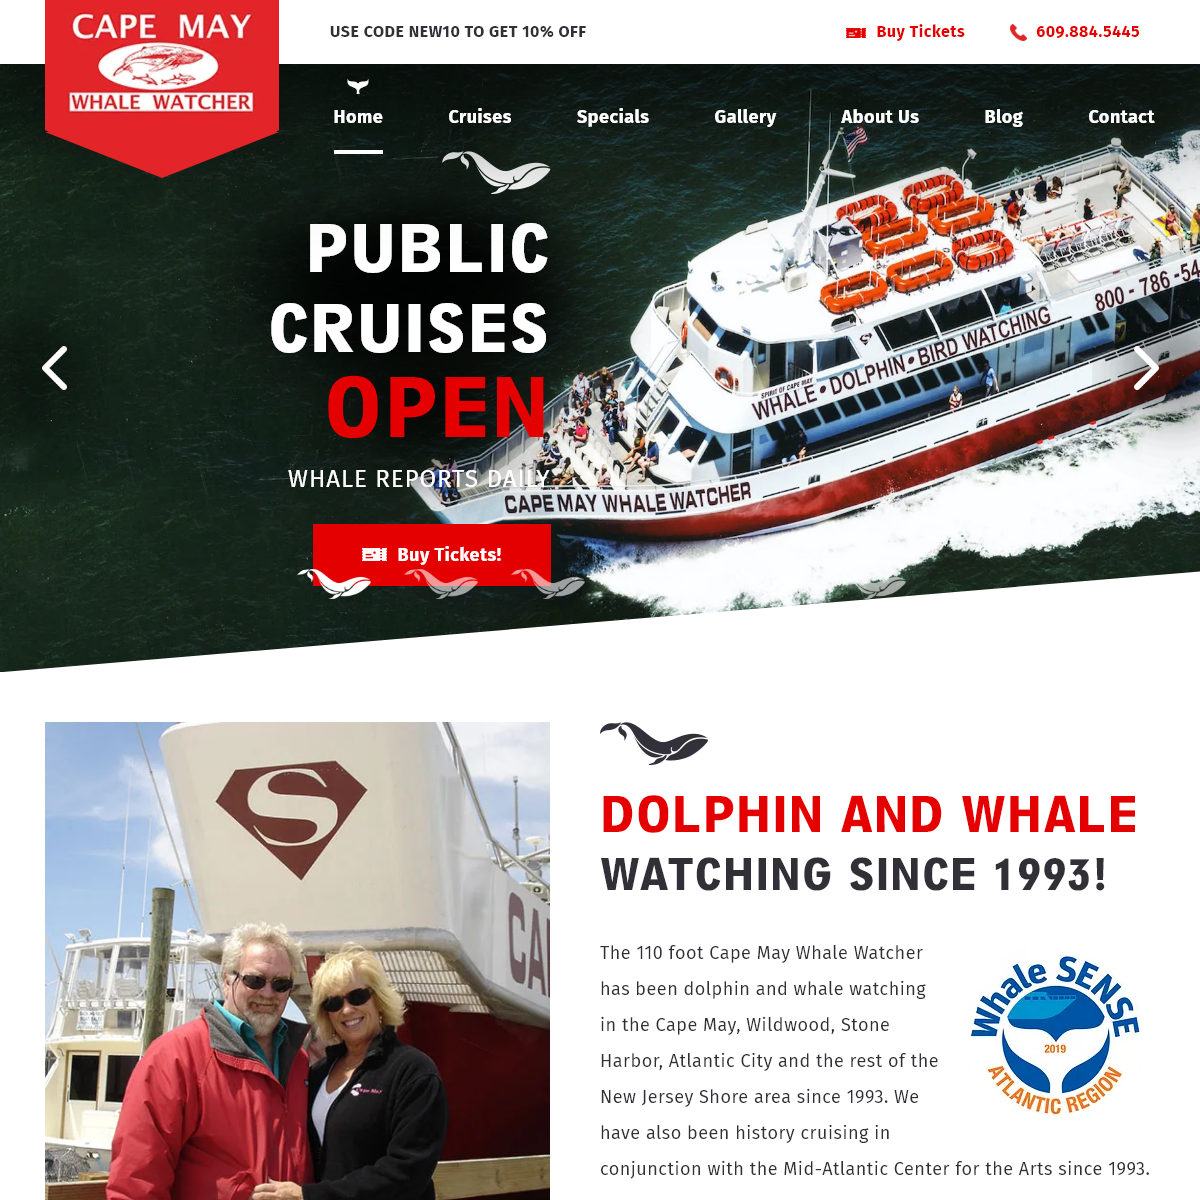 A complete backup of capemaywhalewatcher.com